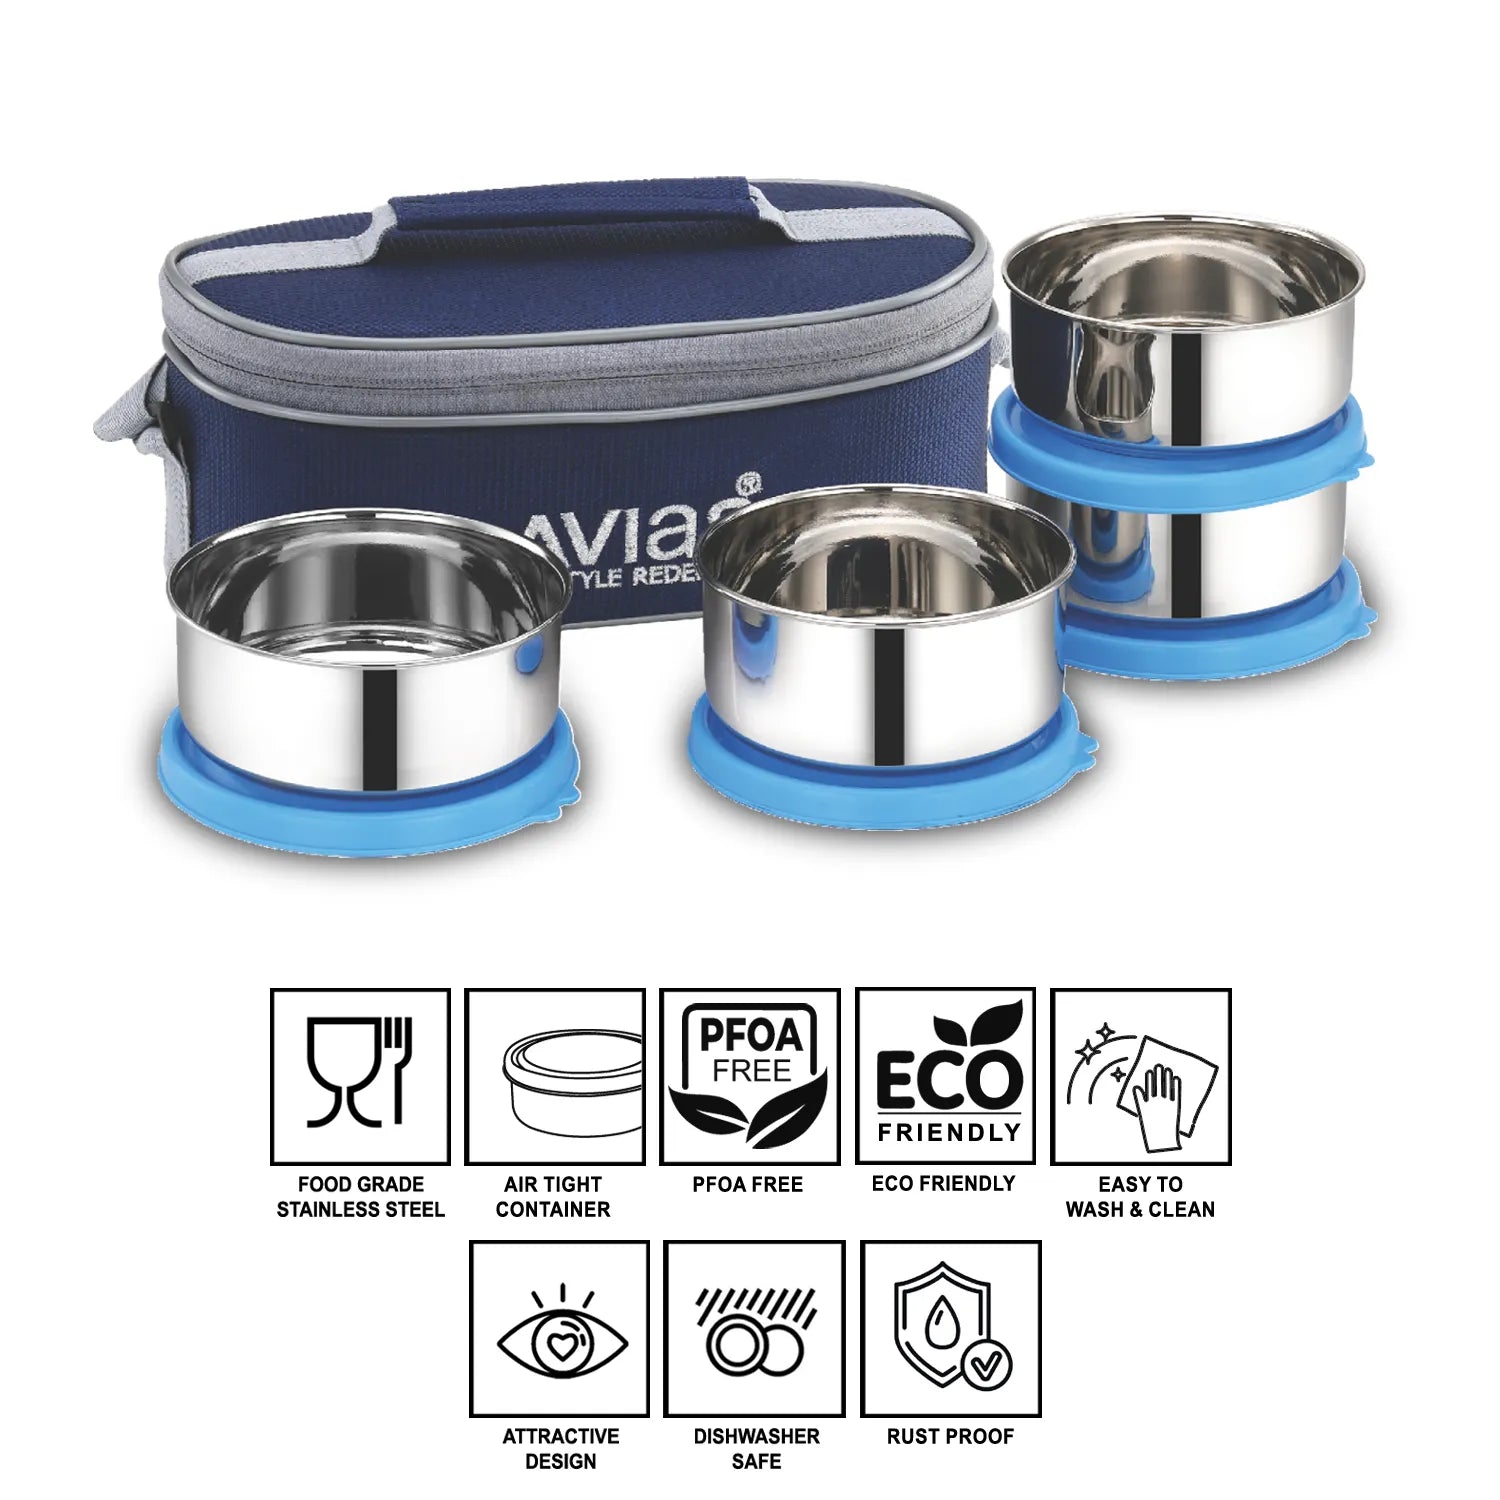 AVIAS Office Combo - Freshia H4 Lunch box features